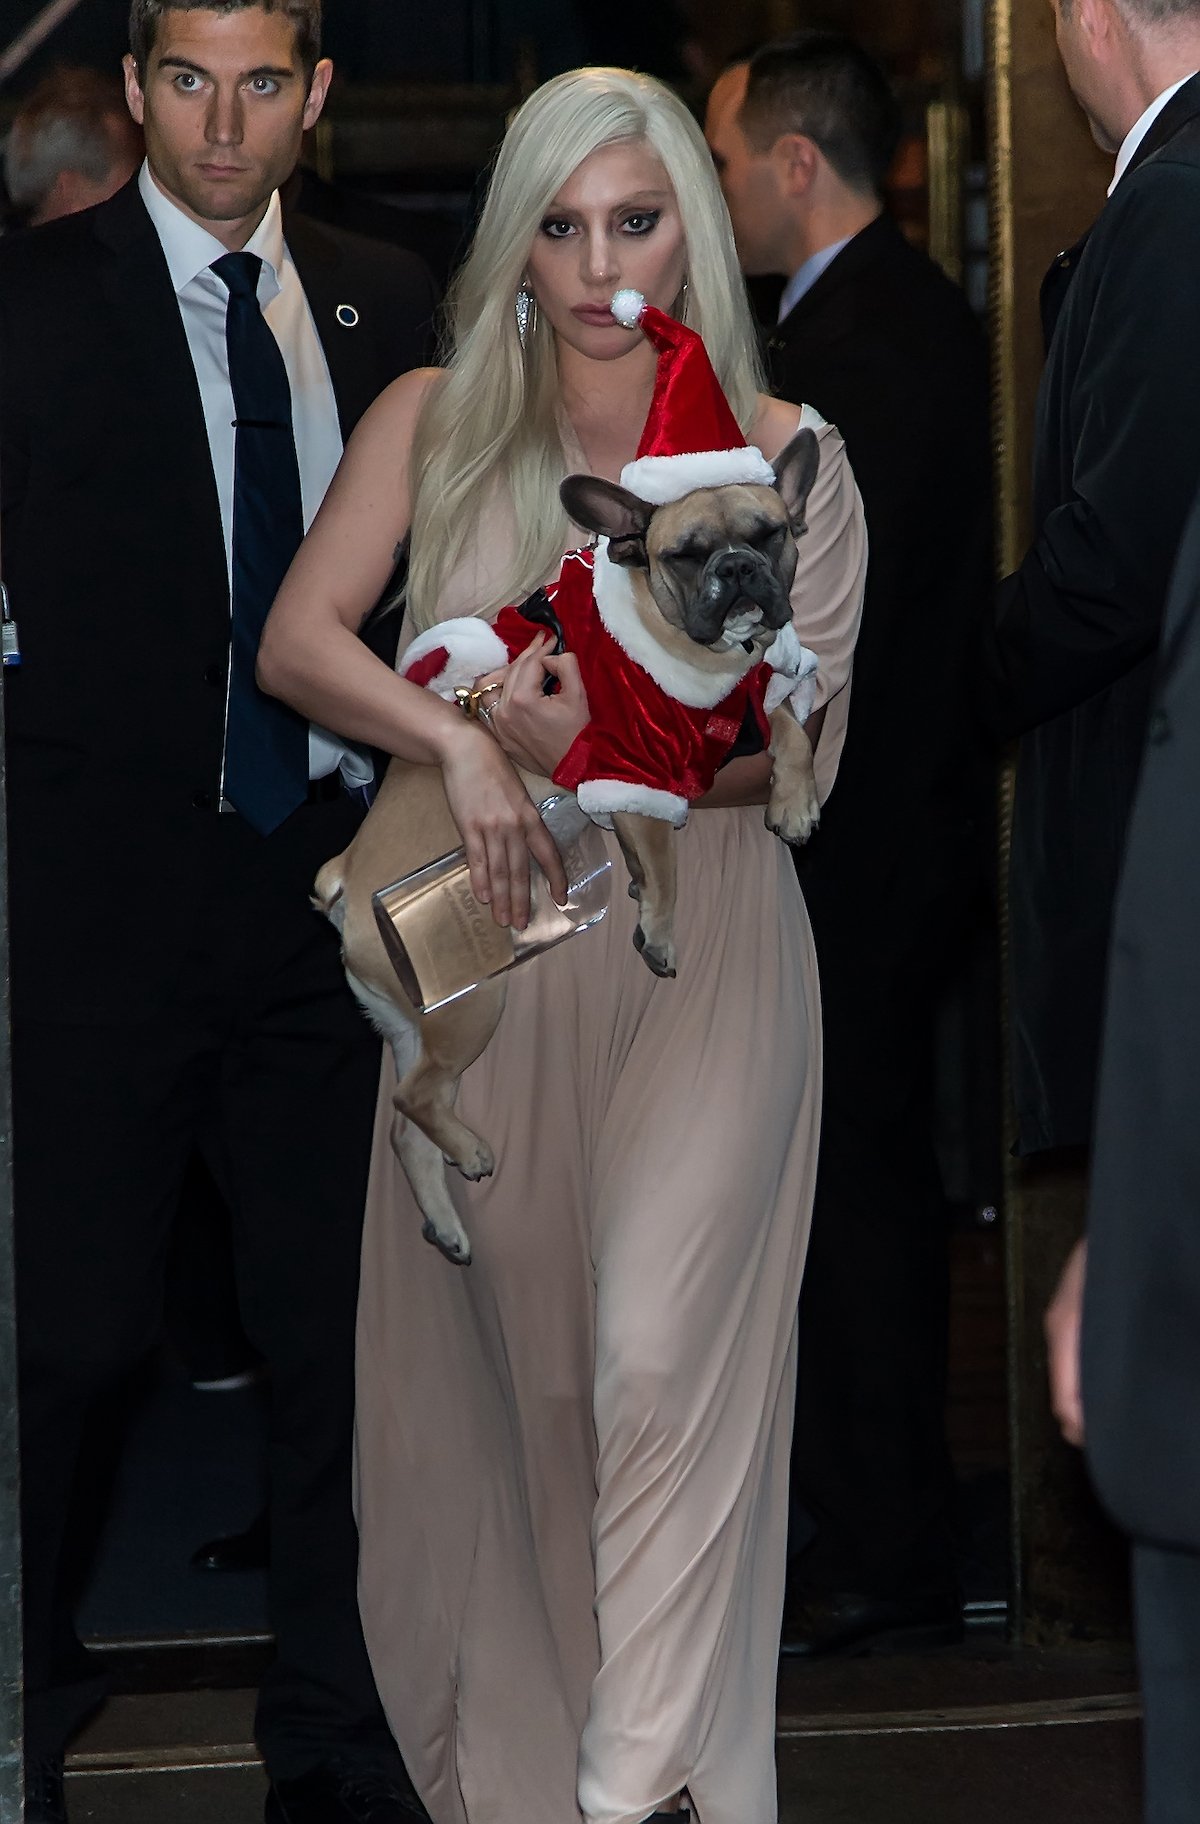 Lady Gaga in a long gown carrying a black dog wearing a Santa costume.